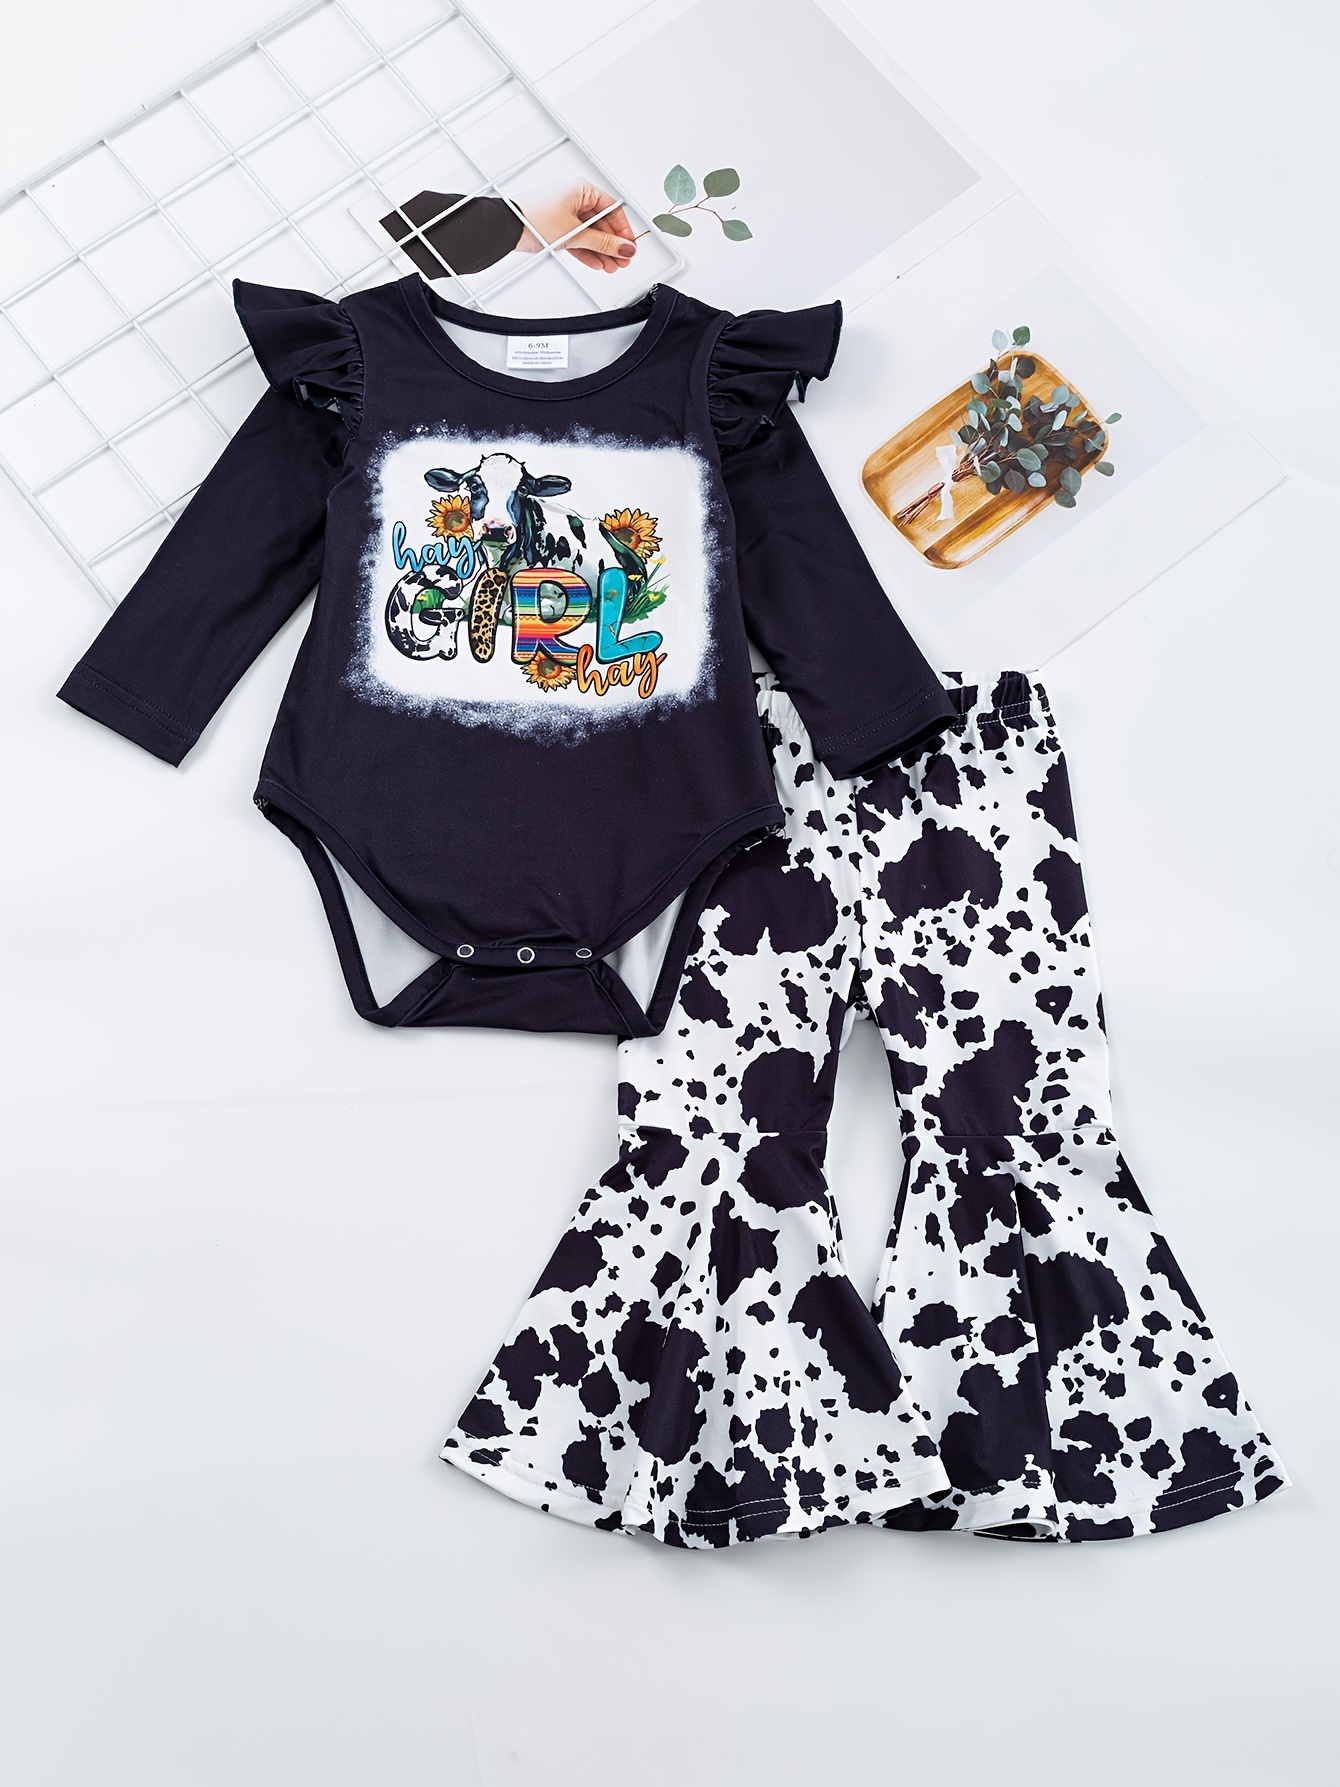 Cute Outfits for Kids Girls Sunflowers Prints Long Sleeves Tops